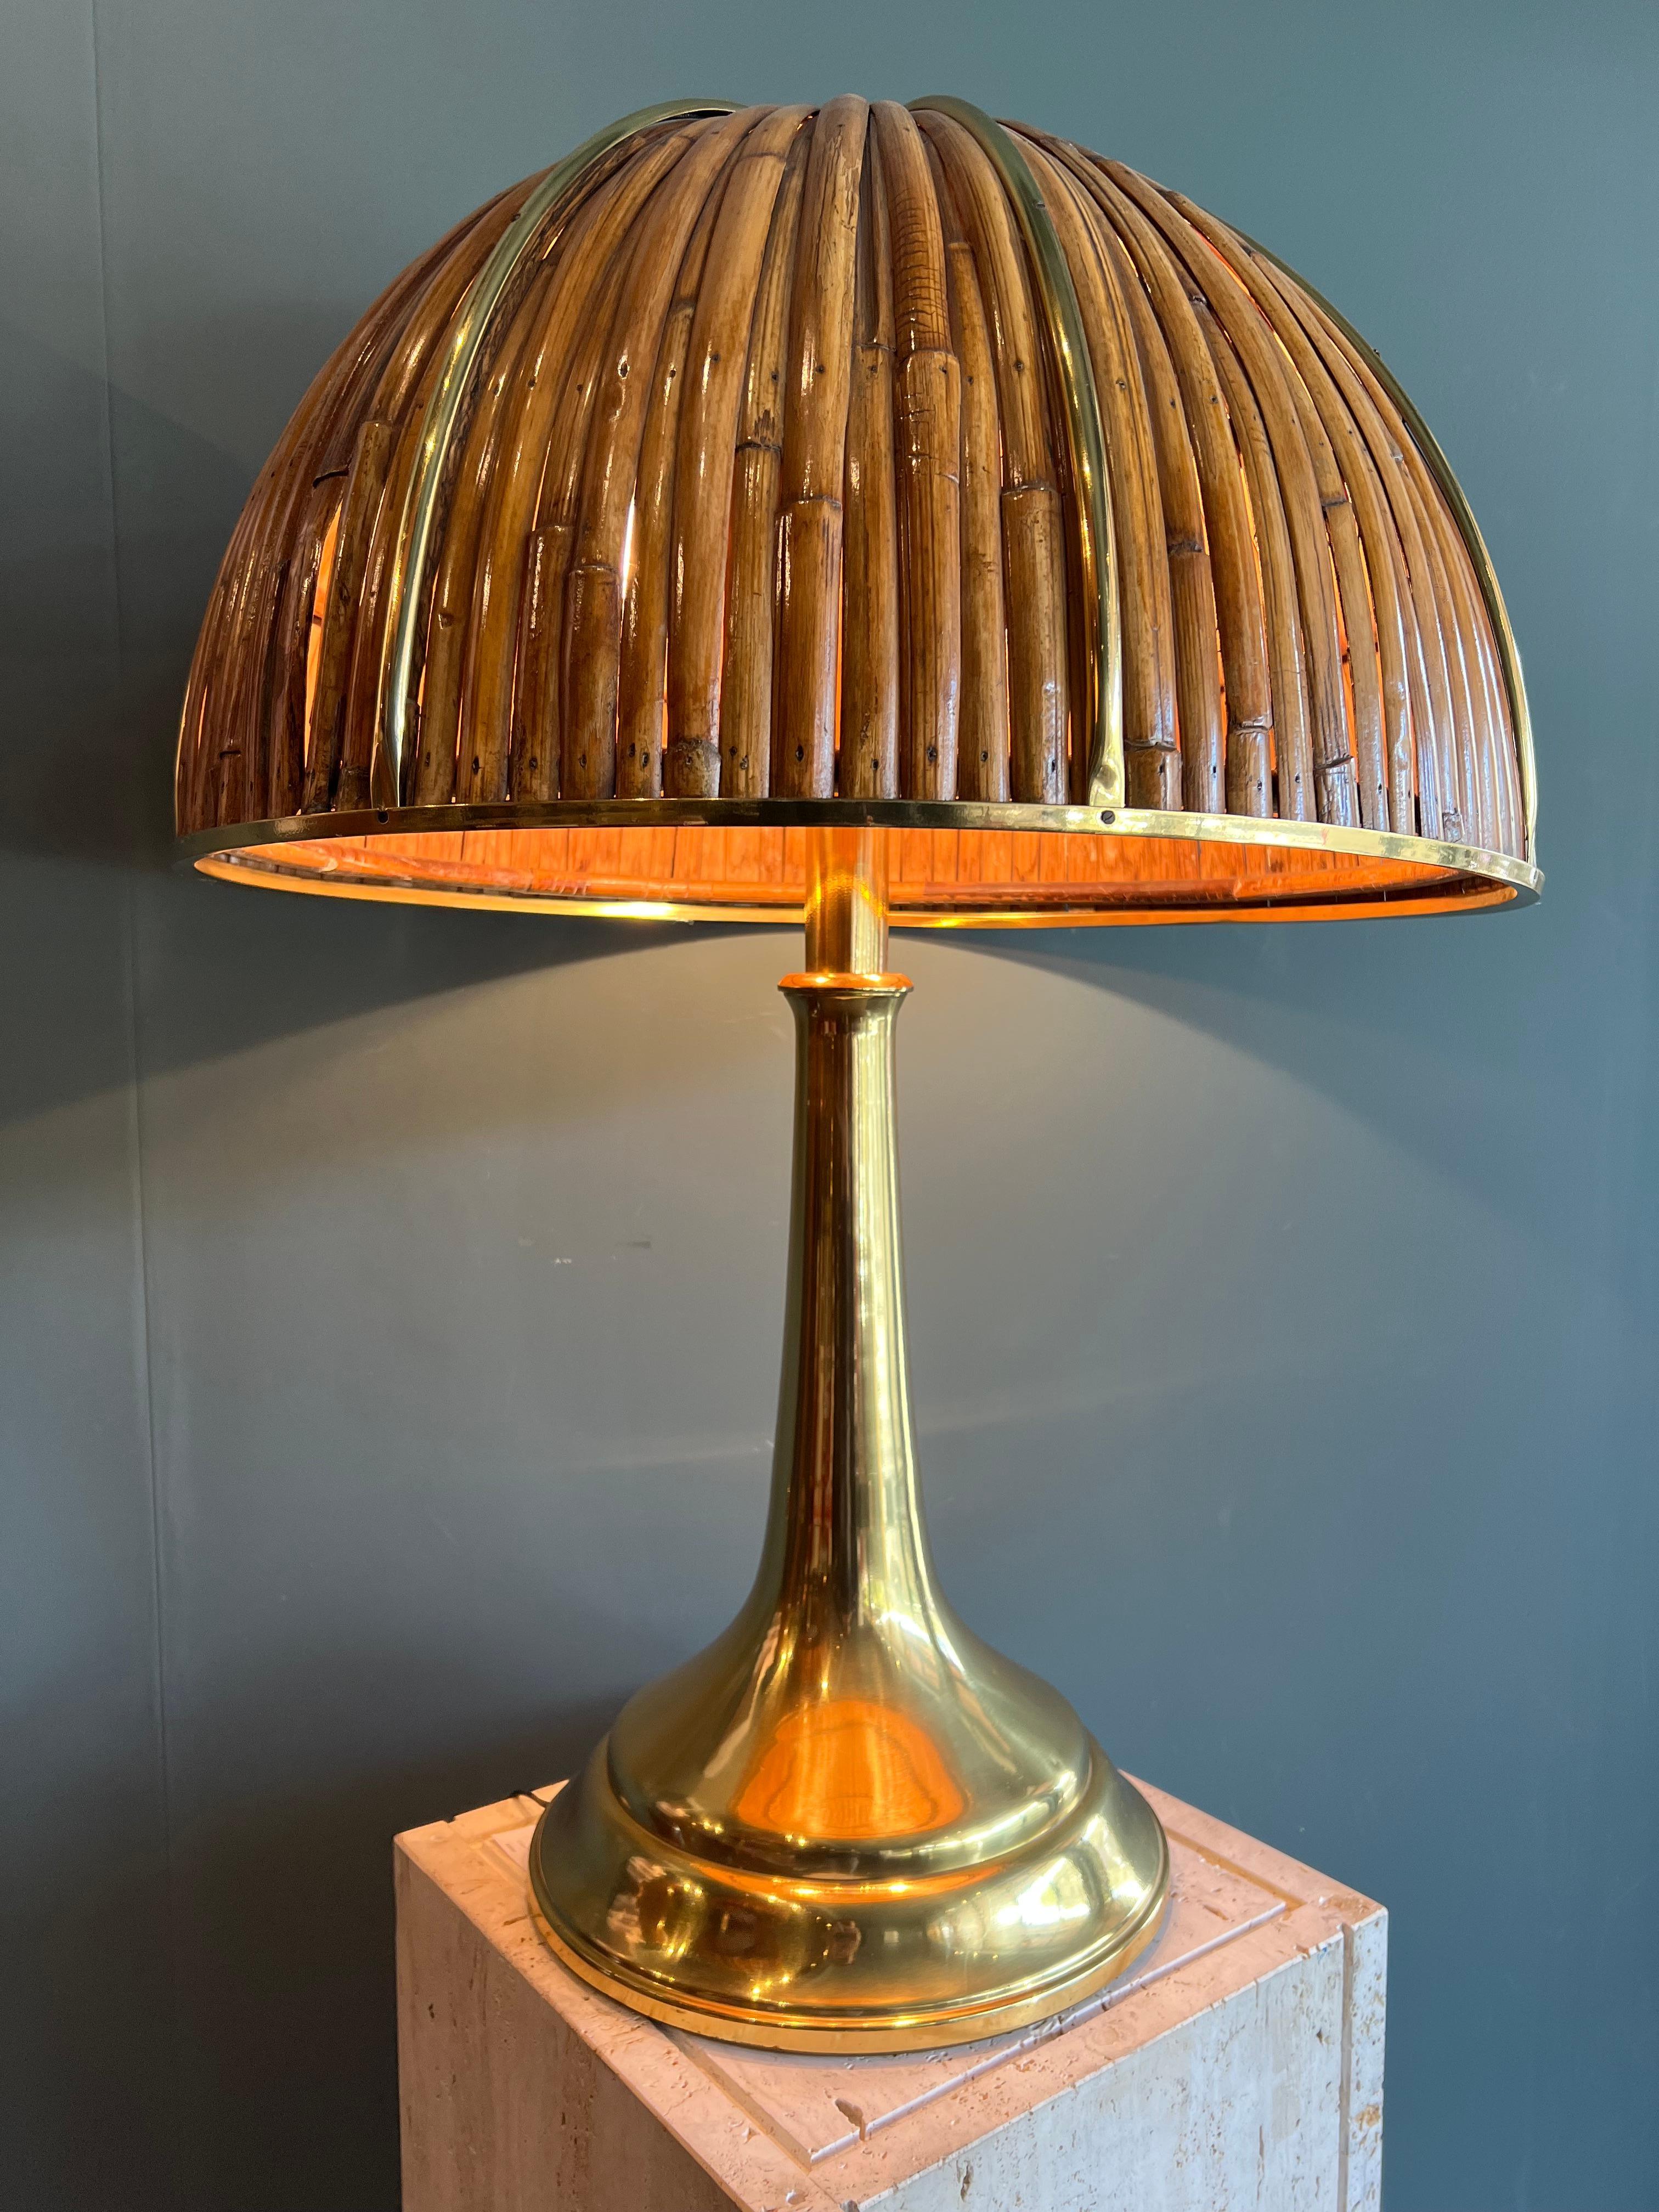 Gabriella Crespi Large Fungo Table Lamp, Rising Sun Series, 1973, Italy For Sale 9